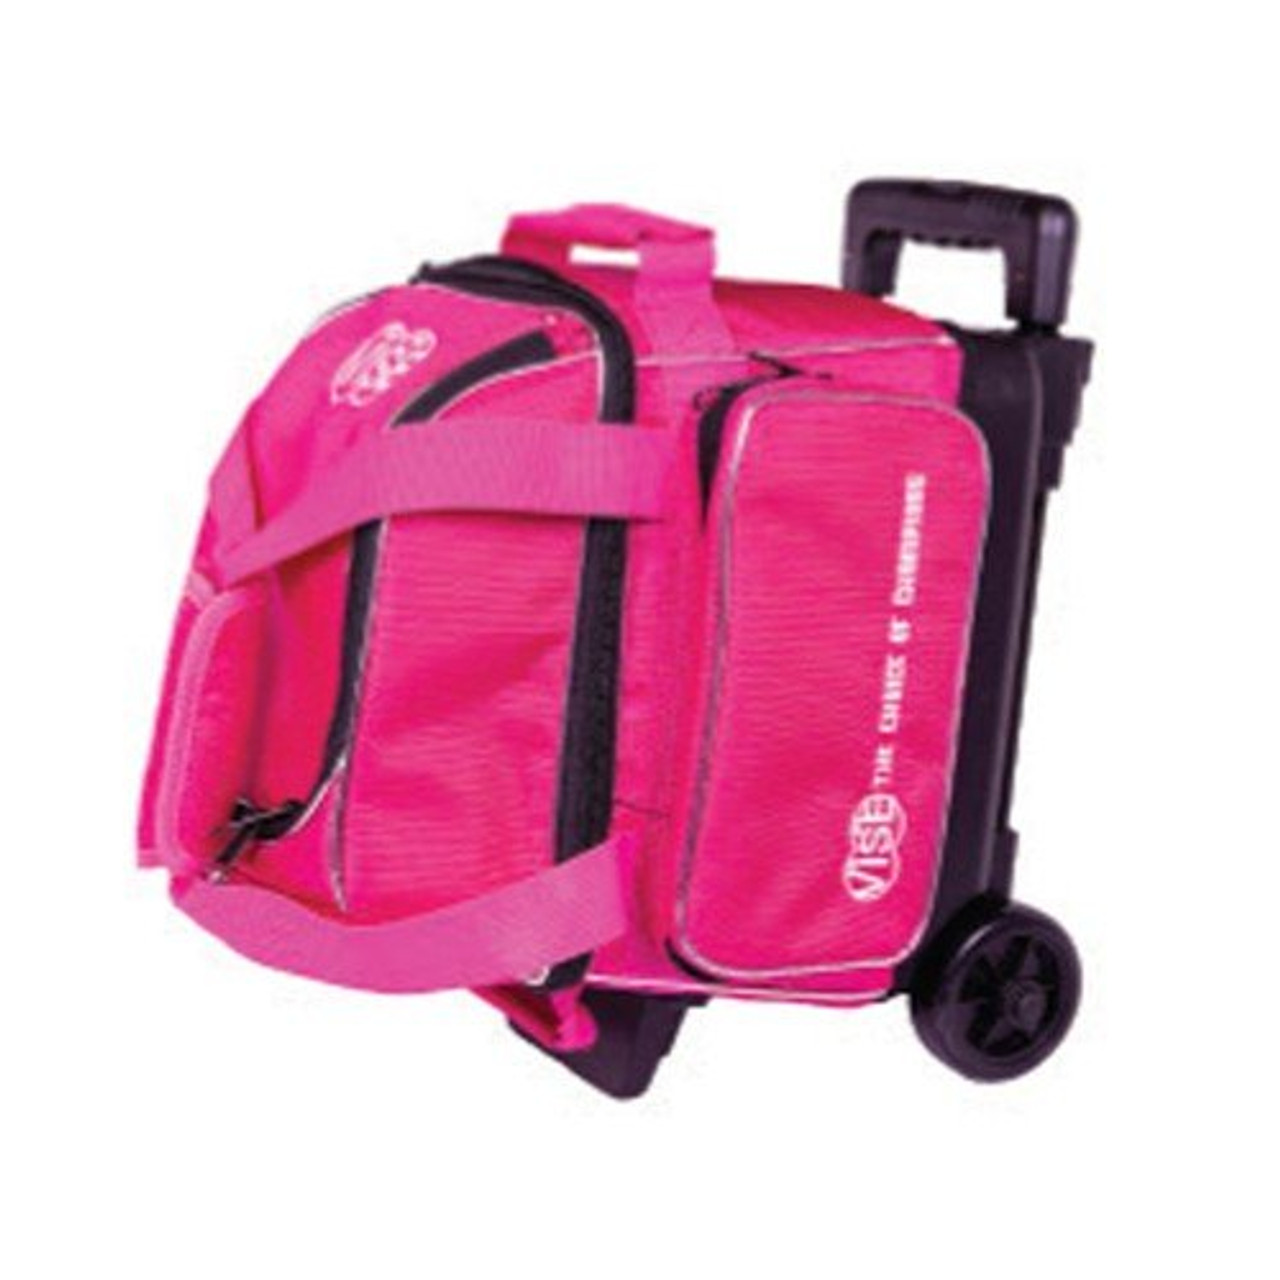 Vise Clear Top 3 Ball Roller Bowling Bag - Black/Pink